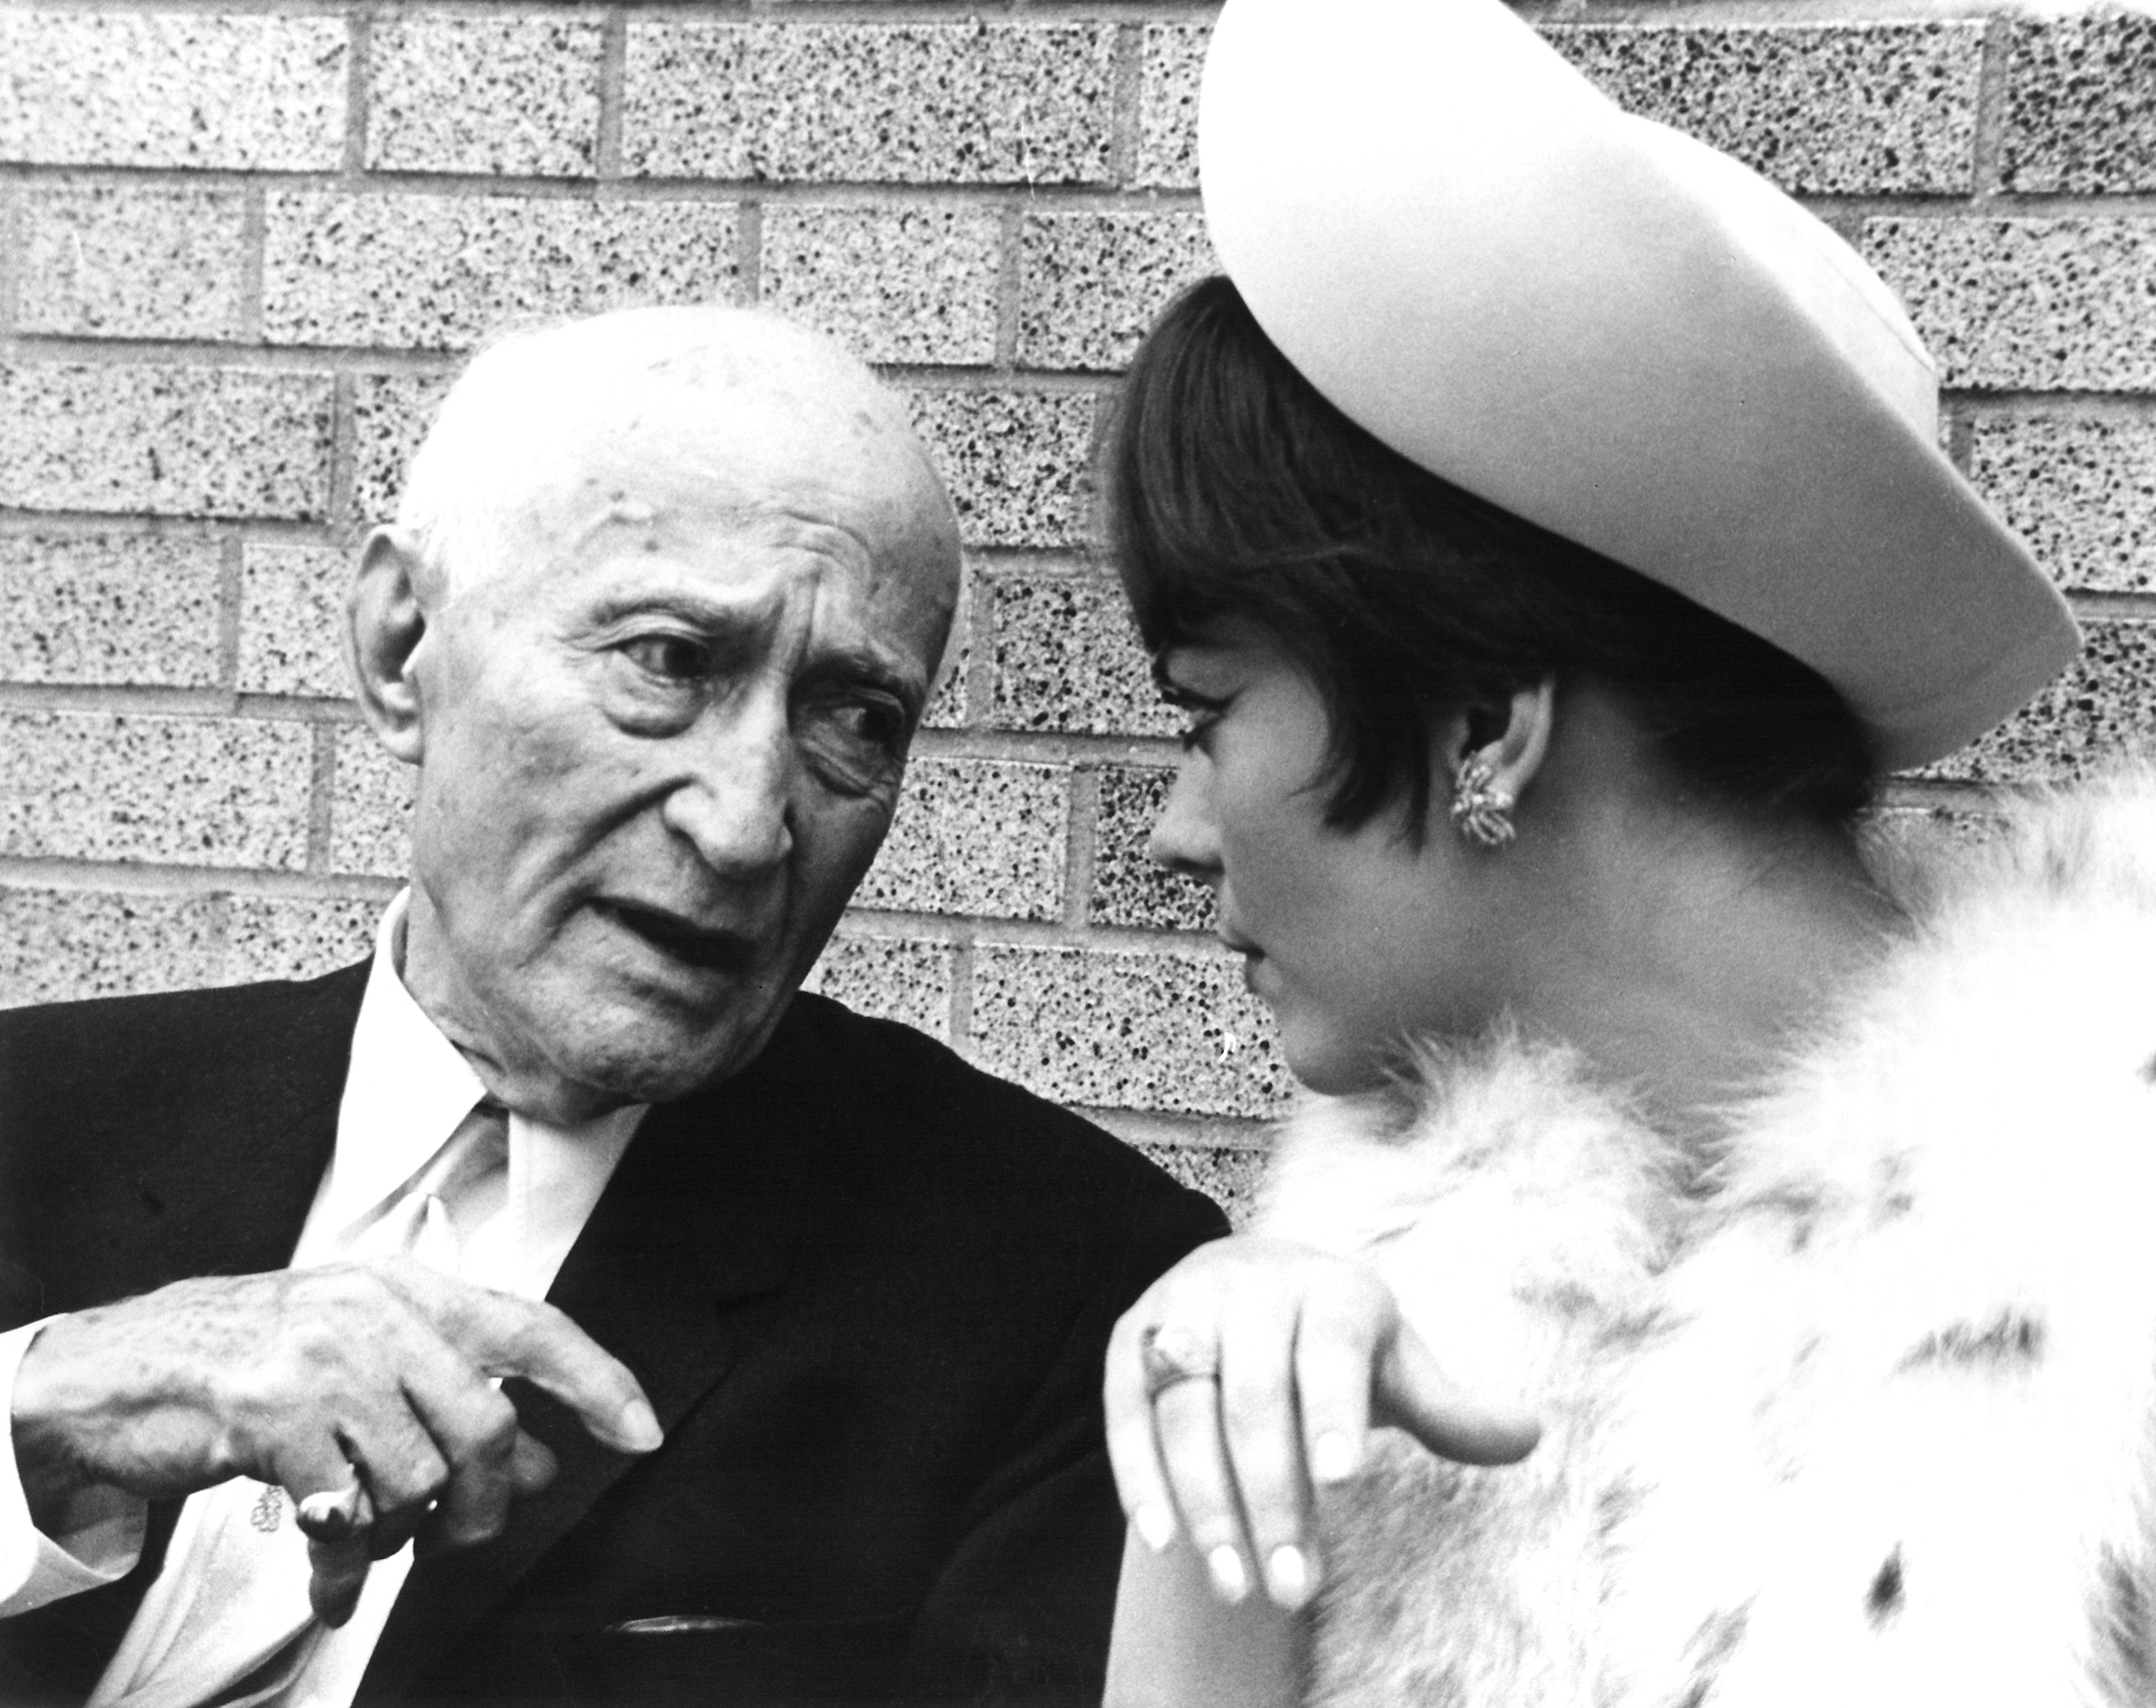 PENELOPE, Adolph Zukor, at age 93, with Natalie Wood, visiting the set of his grandson's film, 1966.